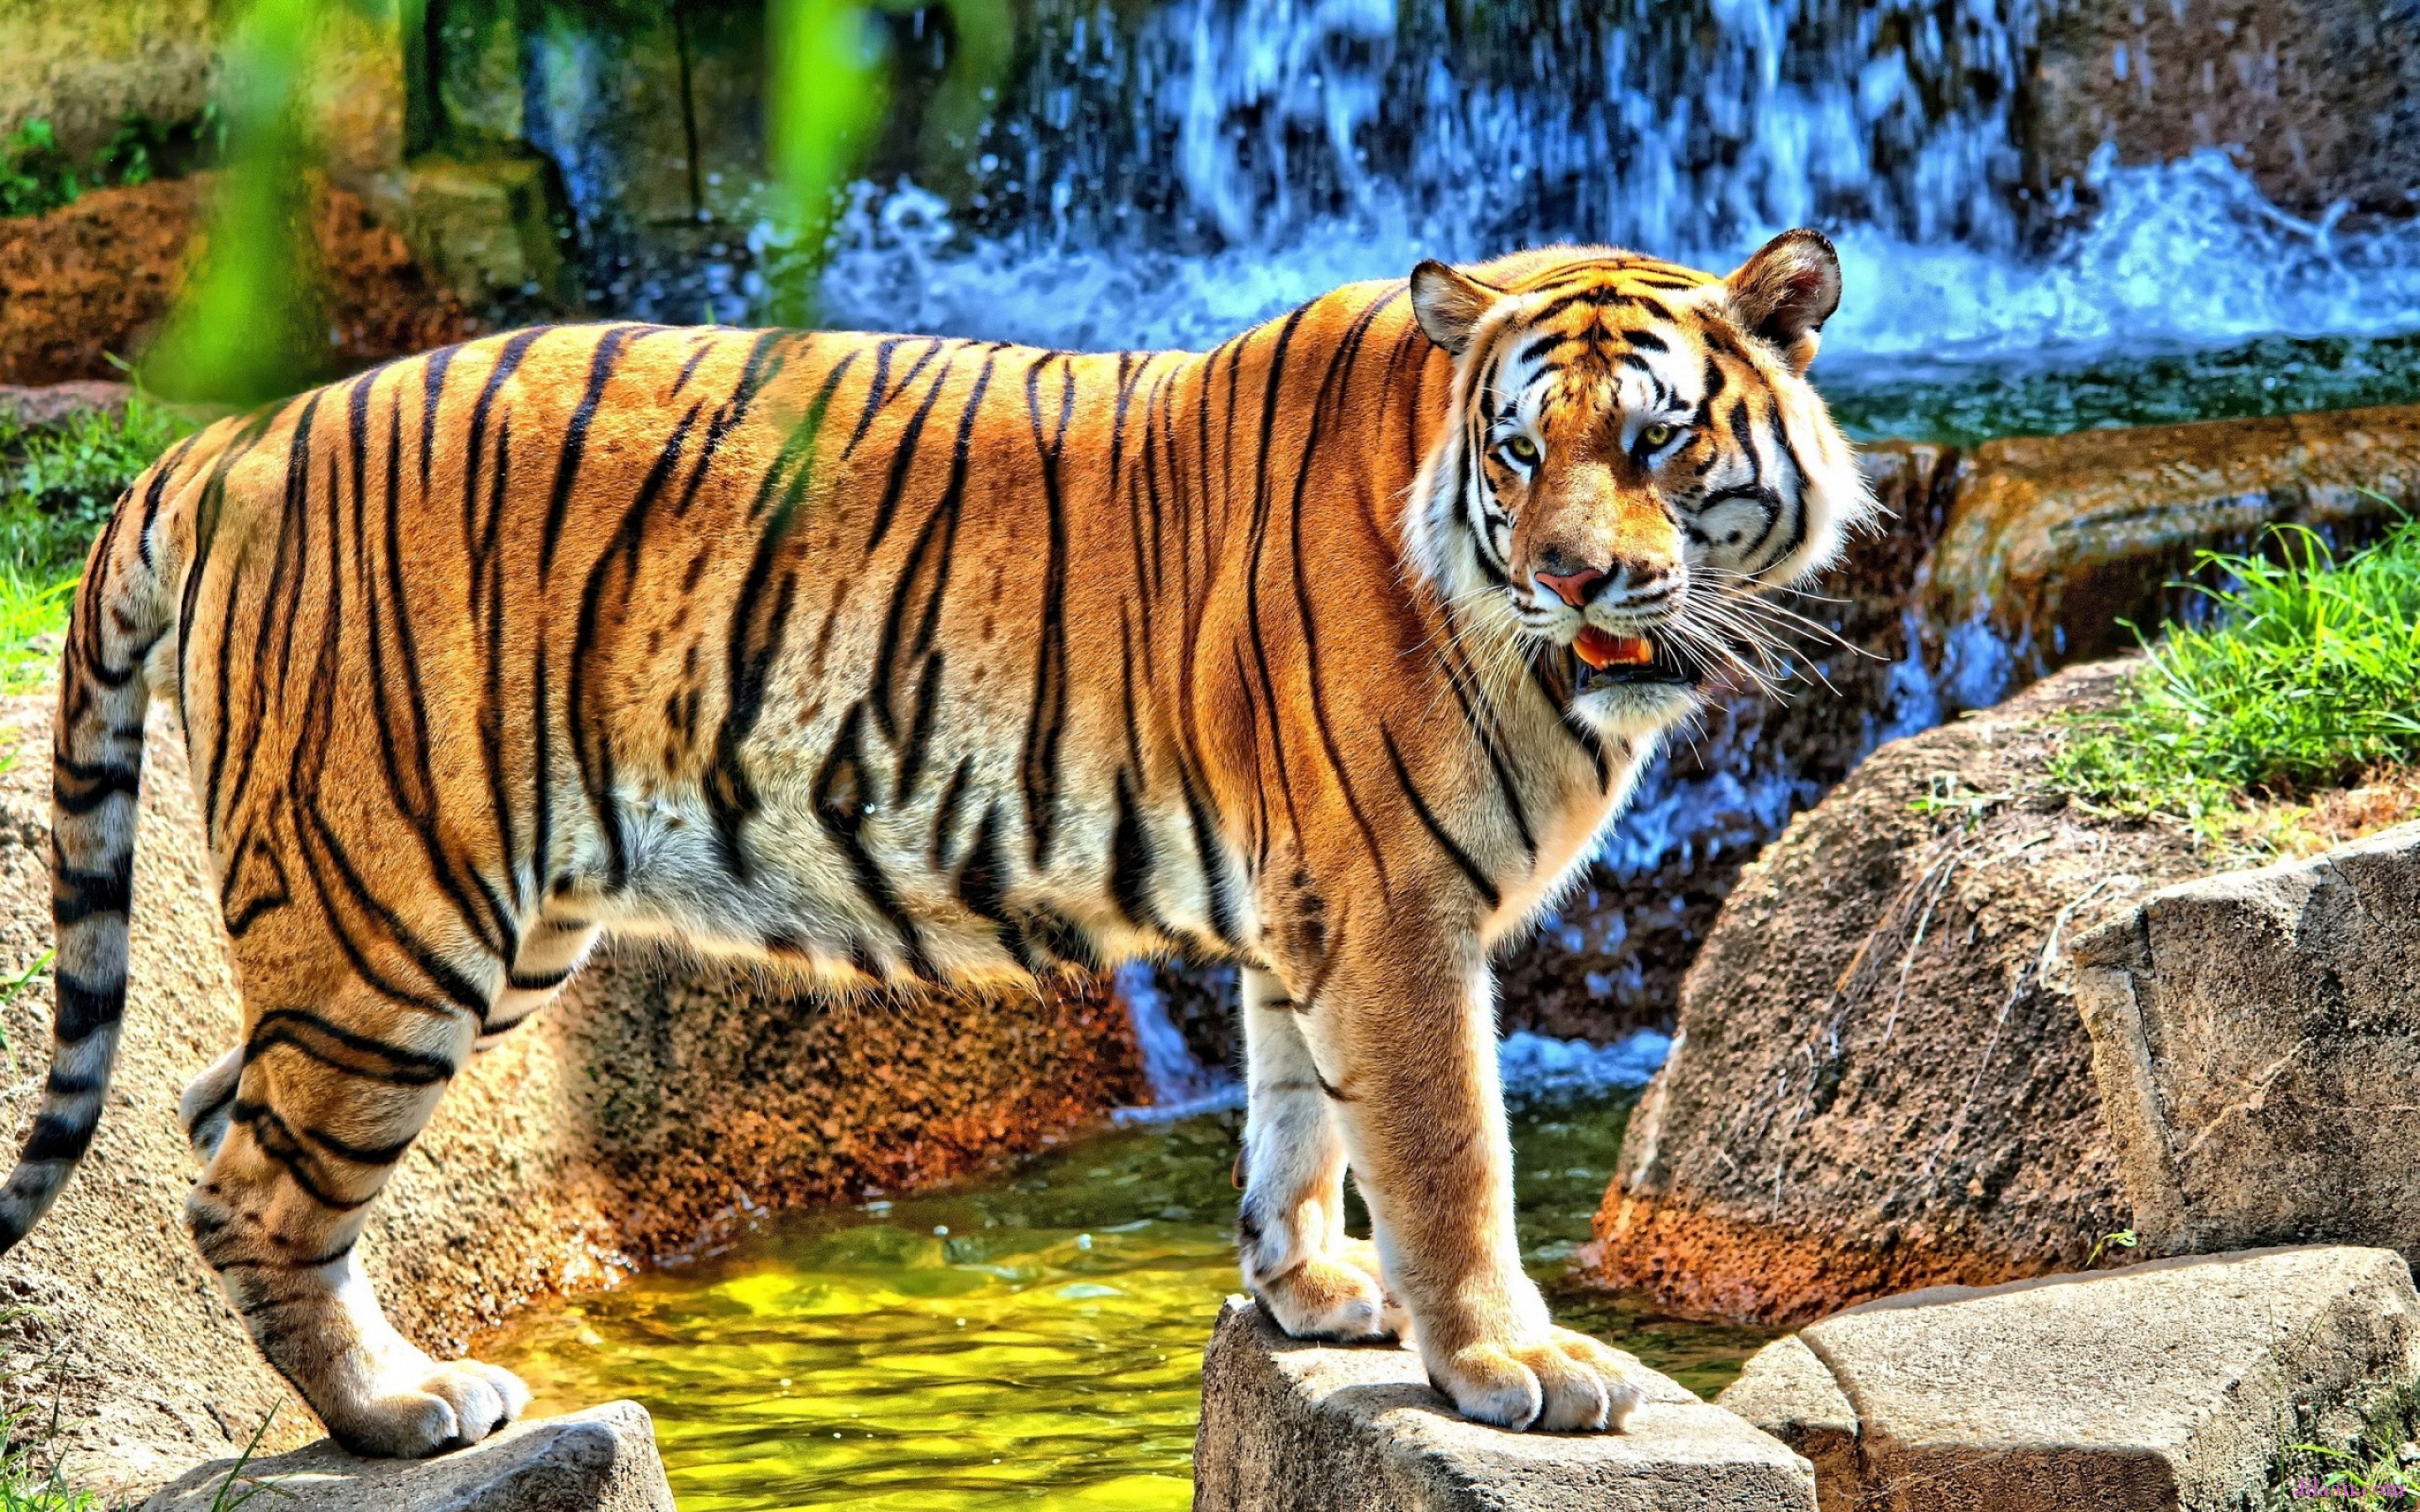 Tiger 4K Wallpapers | HD Wallpapers | ID #27974